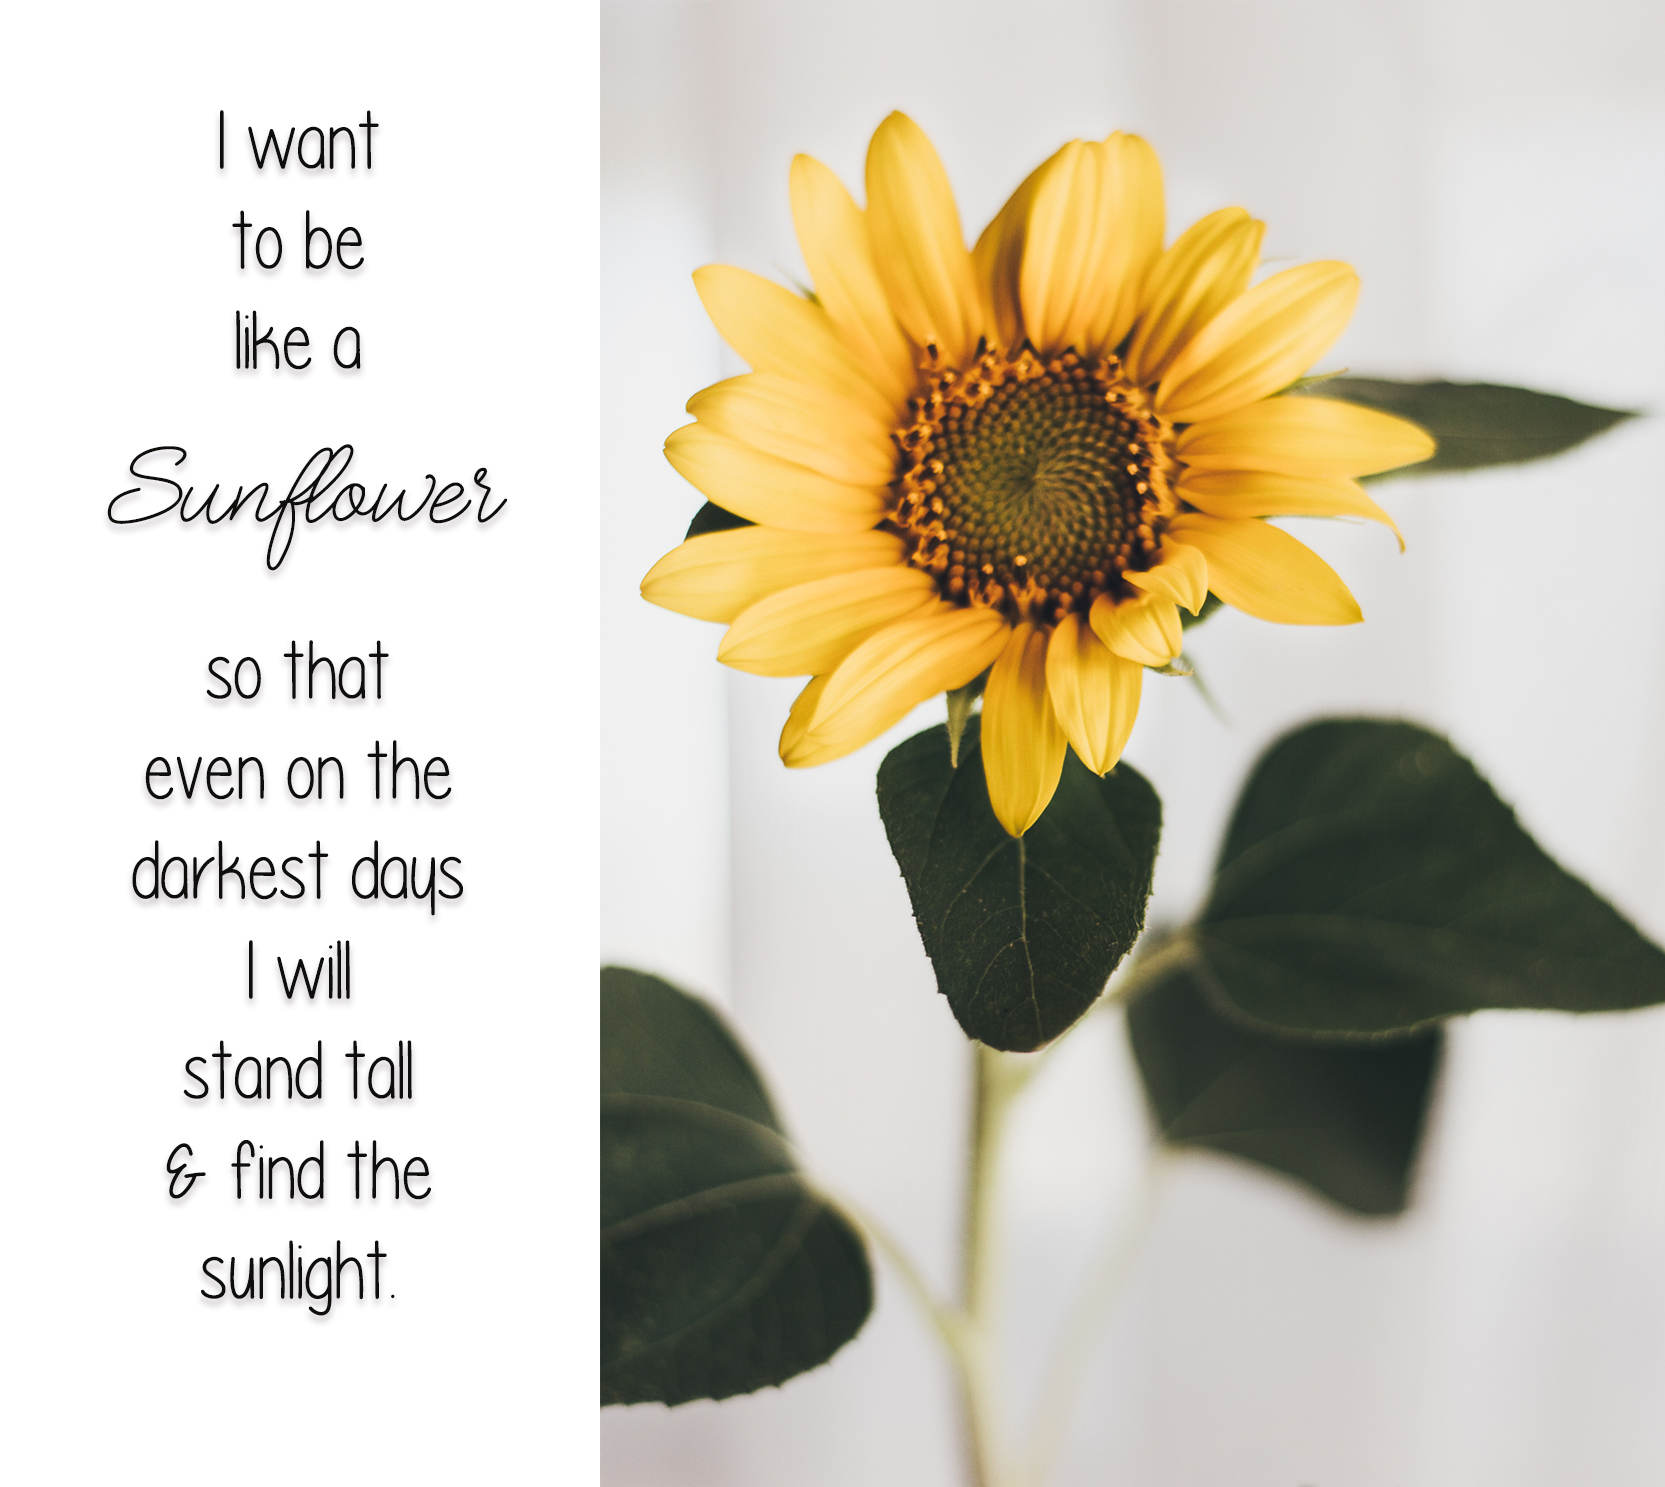 Sunflower Quote with Sunflower